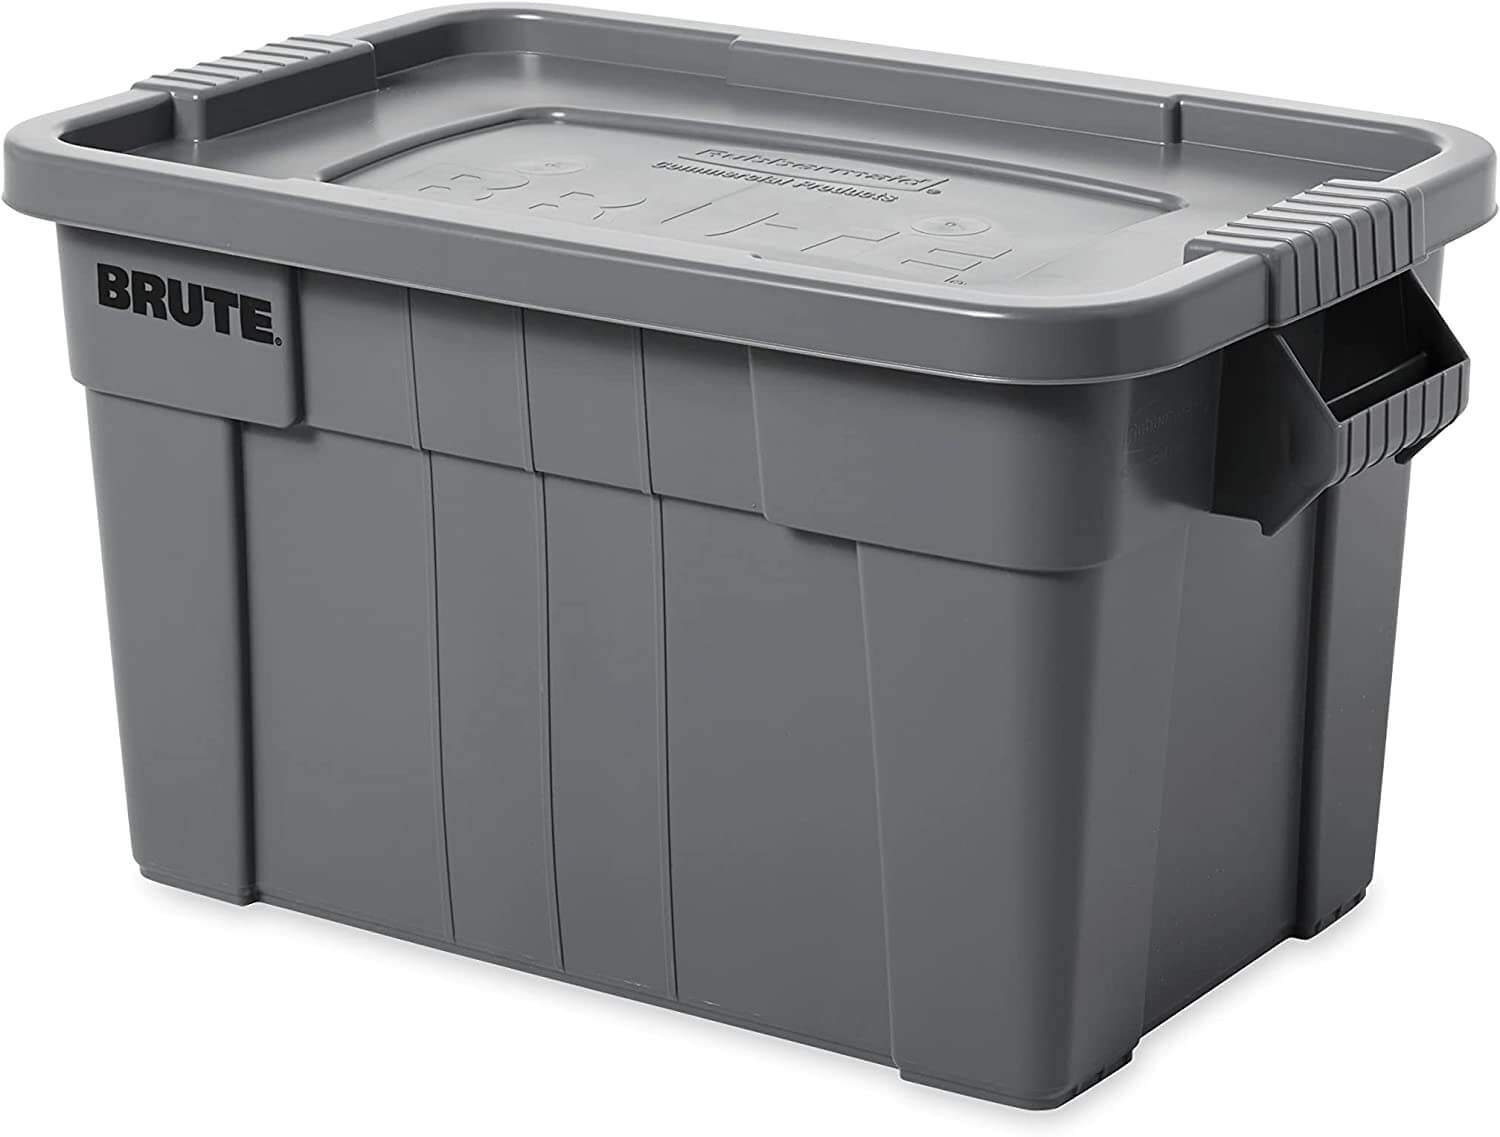 Rubbermaid Commercial Products BRUTE Tote Storage Bin With Lid